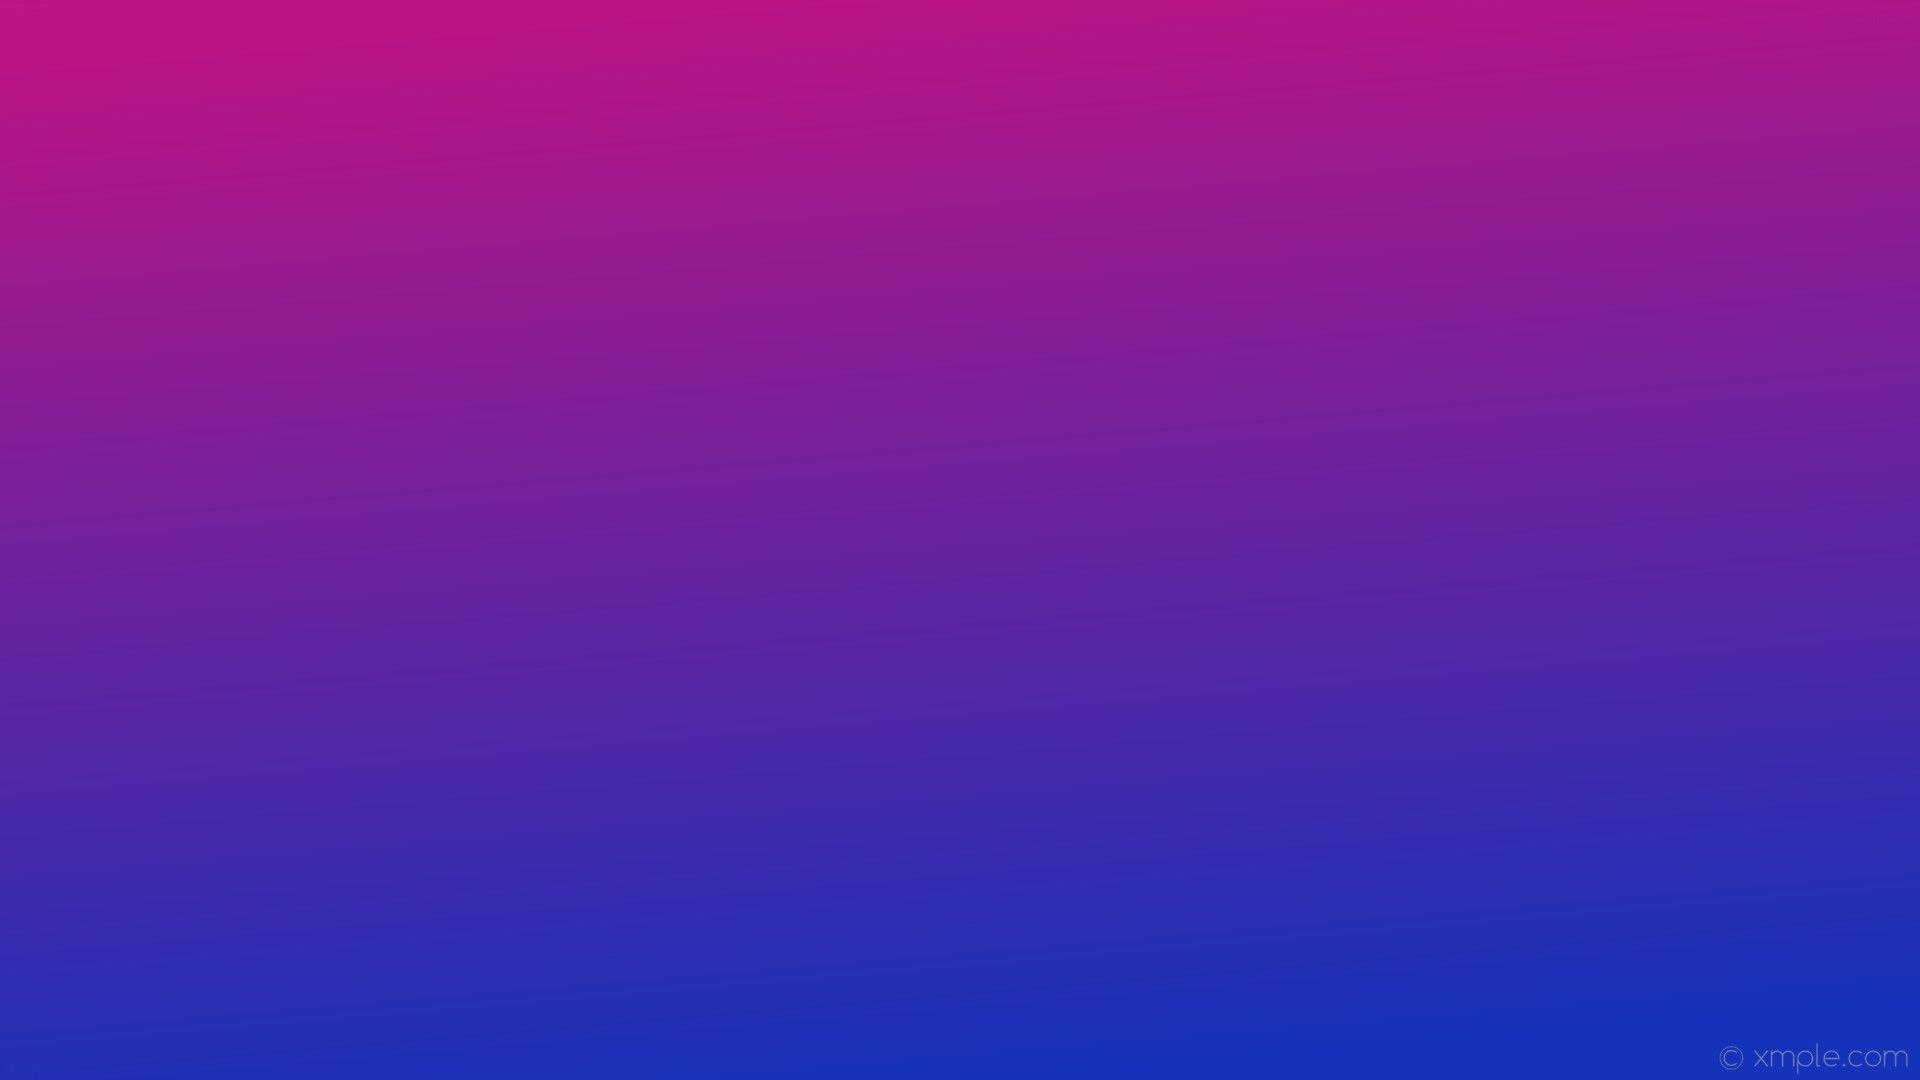 Free download Pink Purple Blue Ombre Wallpaper 4k HD Pink Purple Blue Ombre [1920x1080] for your Desktop, Mobile & Tablet. Explore Purple and Blue Ombre Wallpaper. Purple Ombre Wallpaper